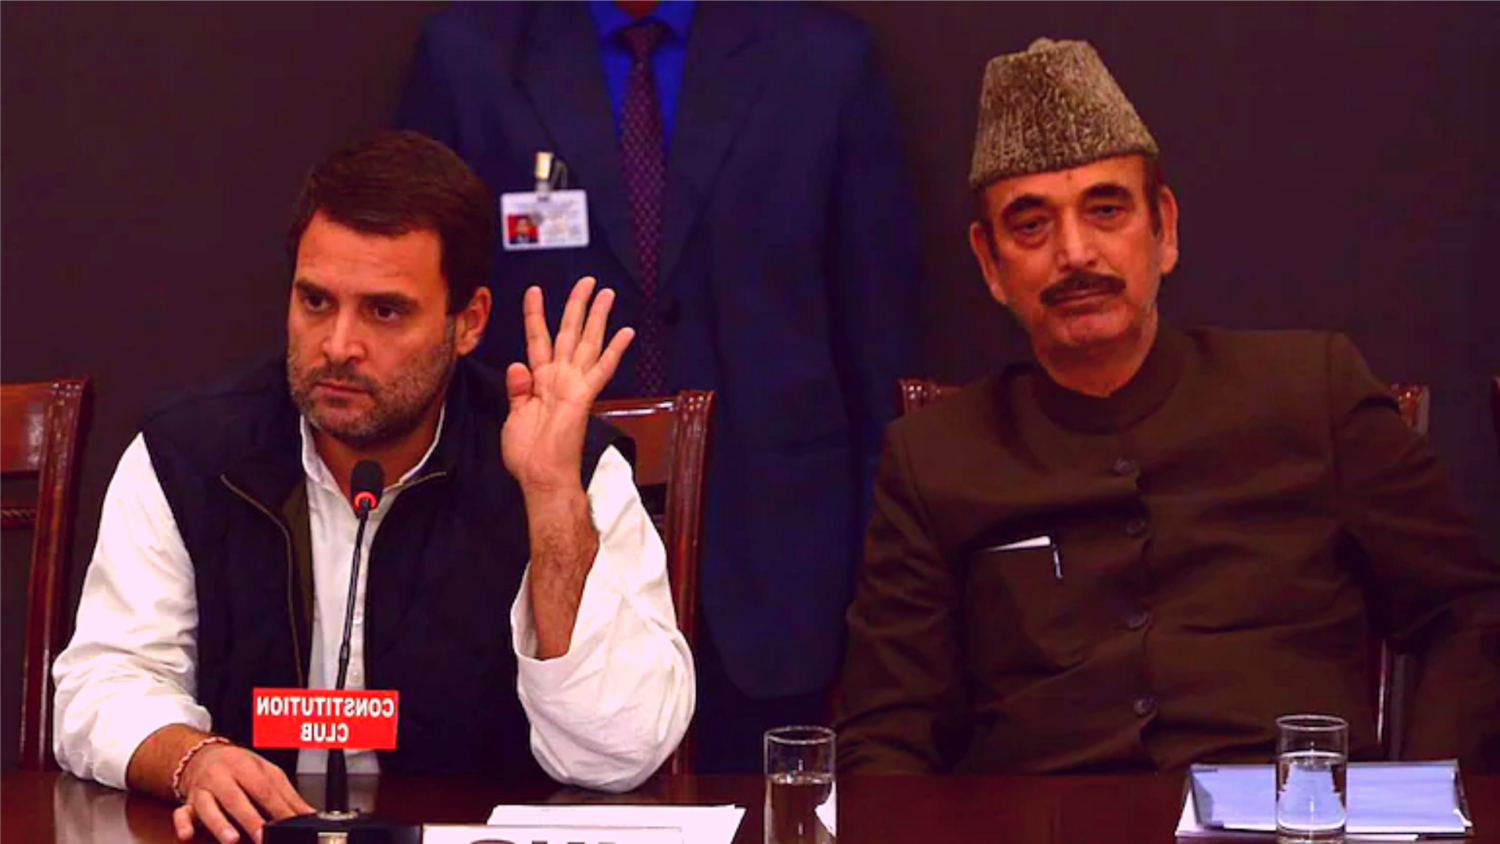 Party decisions taken by Rahul Gandhi, his security guards and PAs: Ghulam Nabi Azad